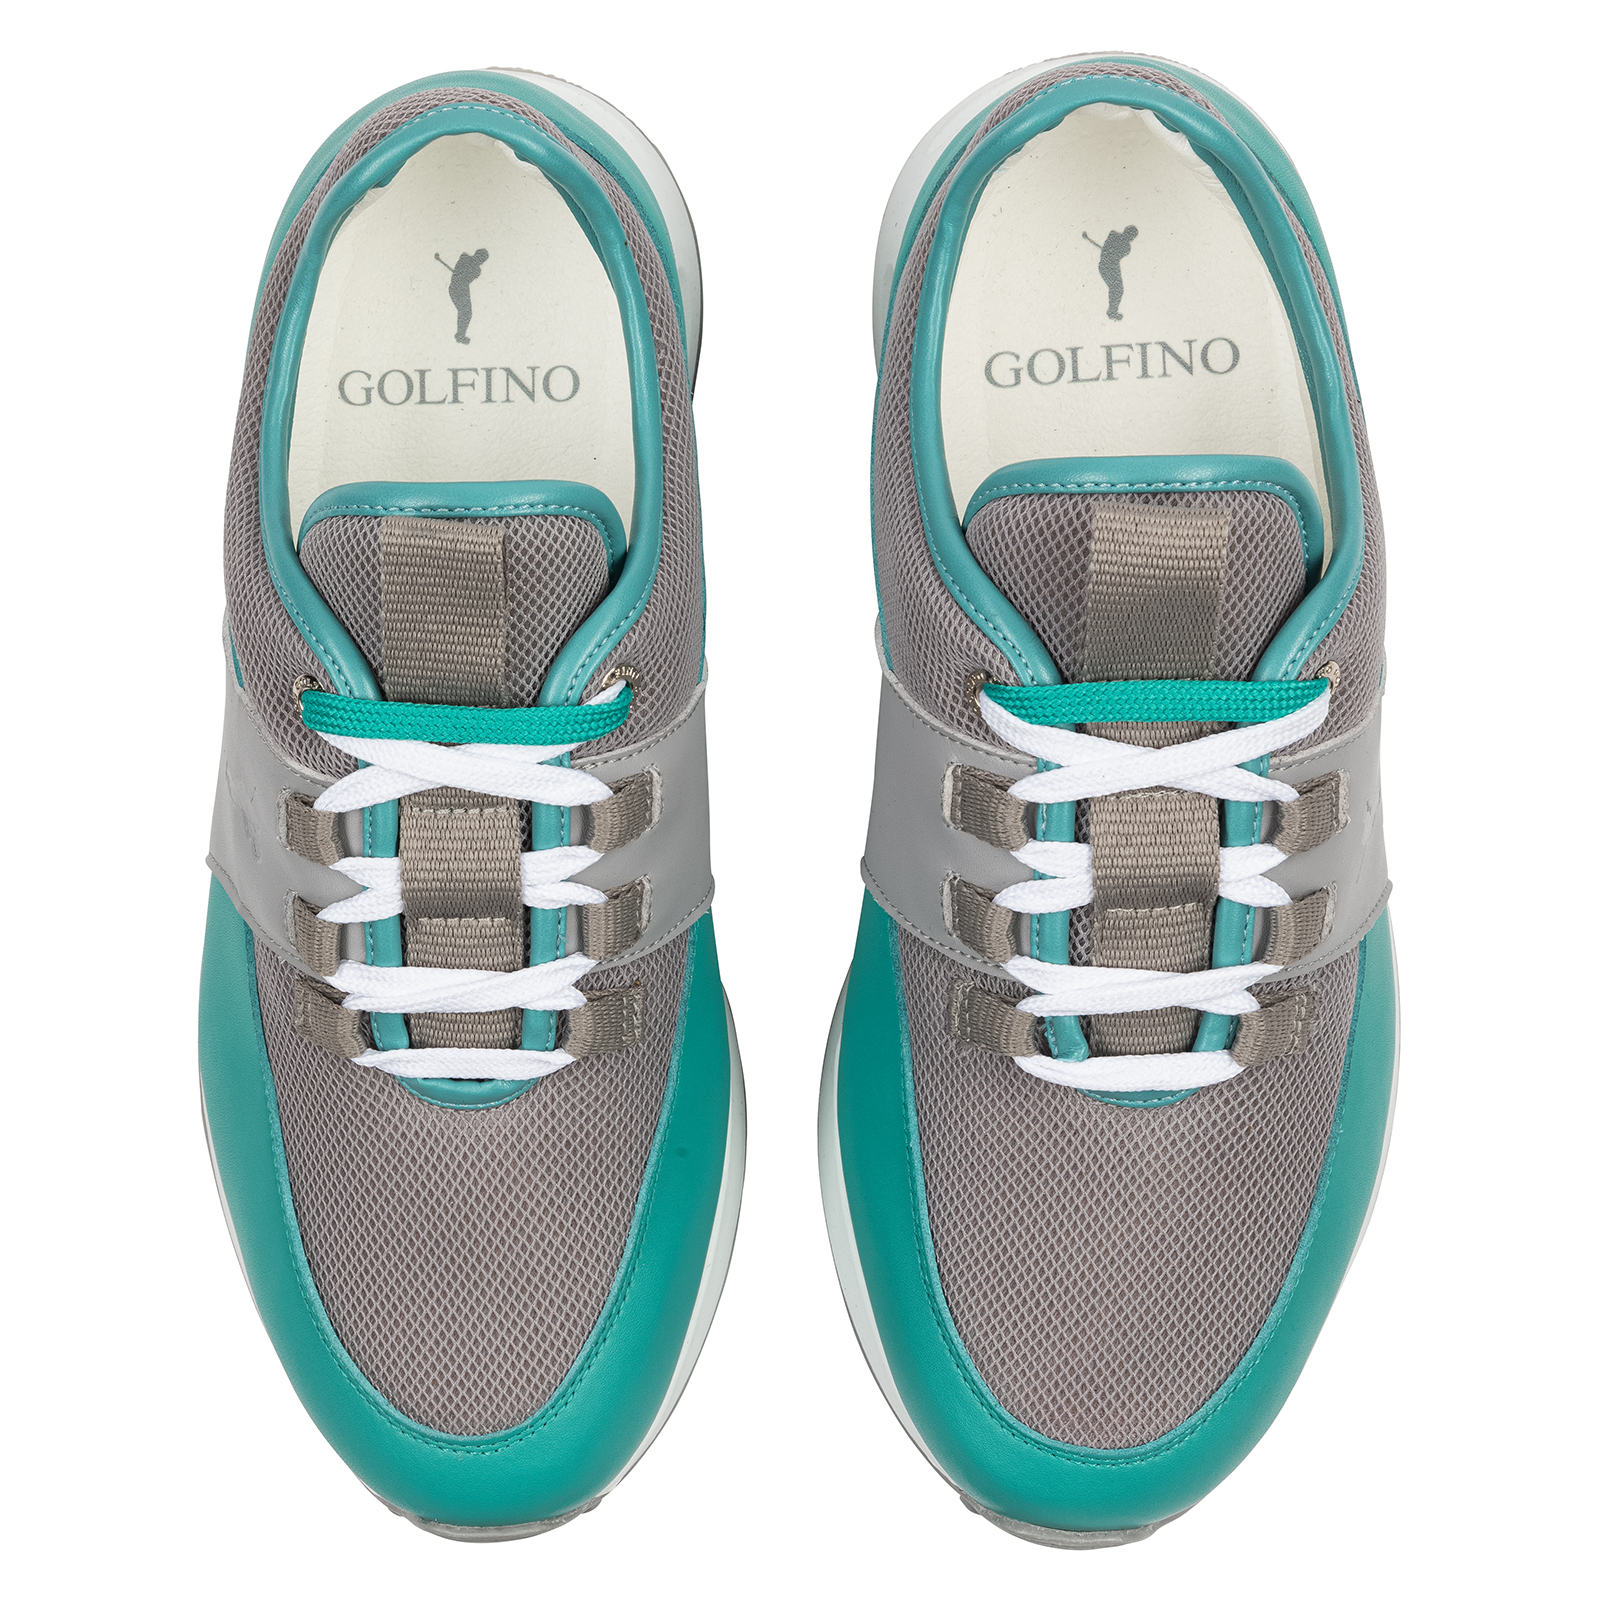 Attractive ladies golf shoes with mesh insert